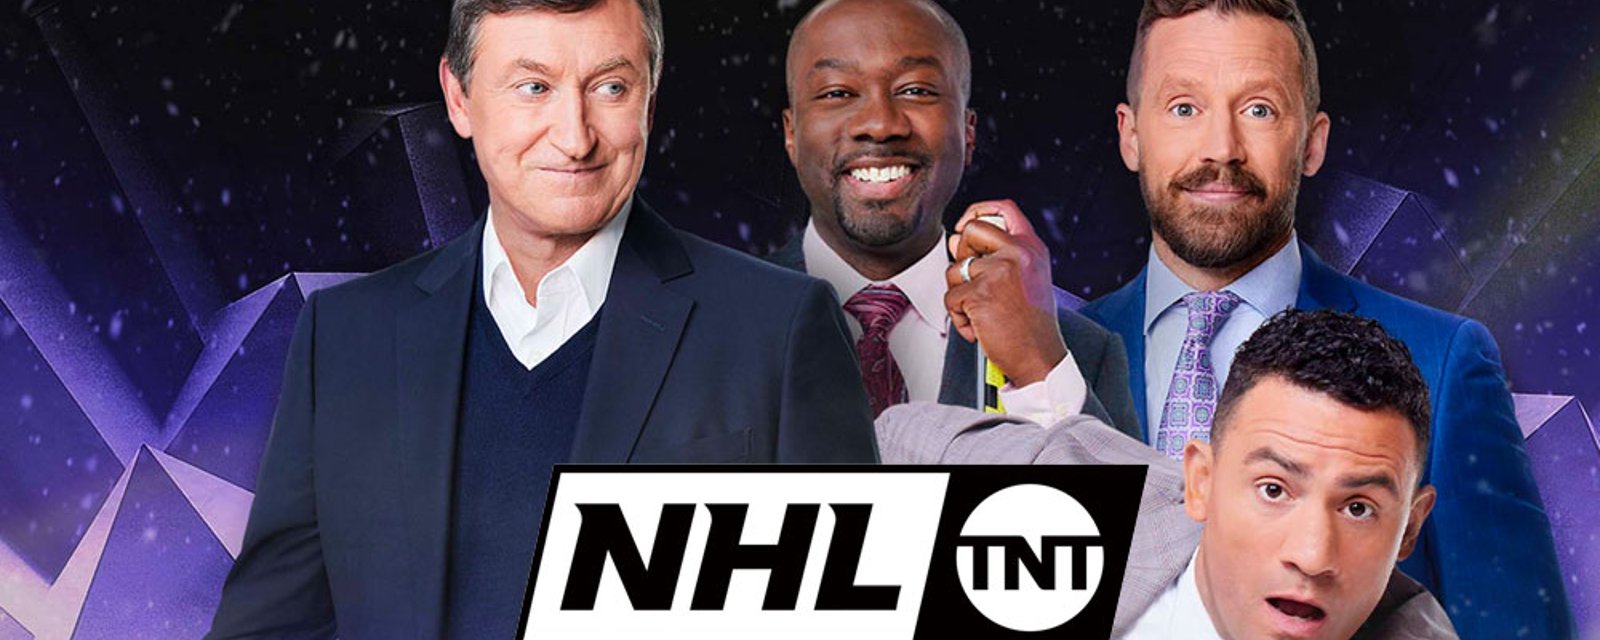 NHL on TNT adds another star broadcaster